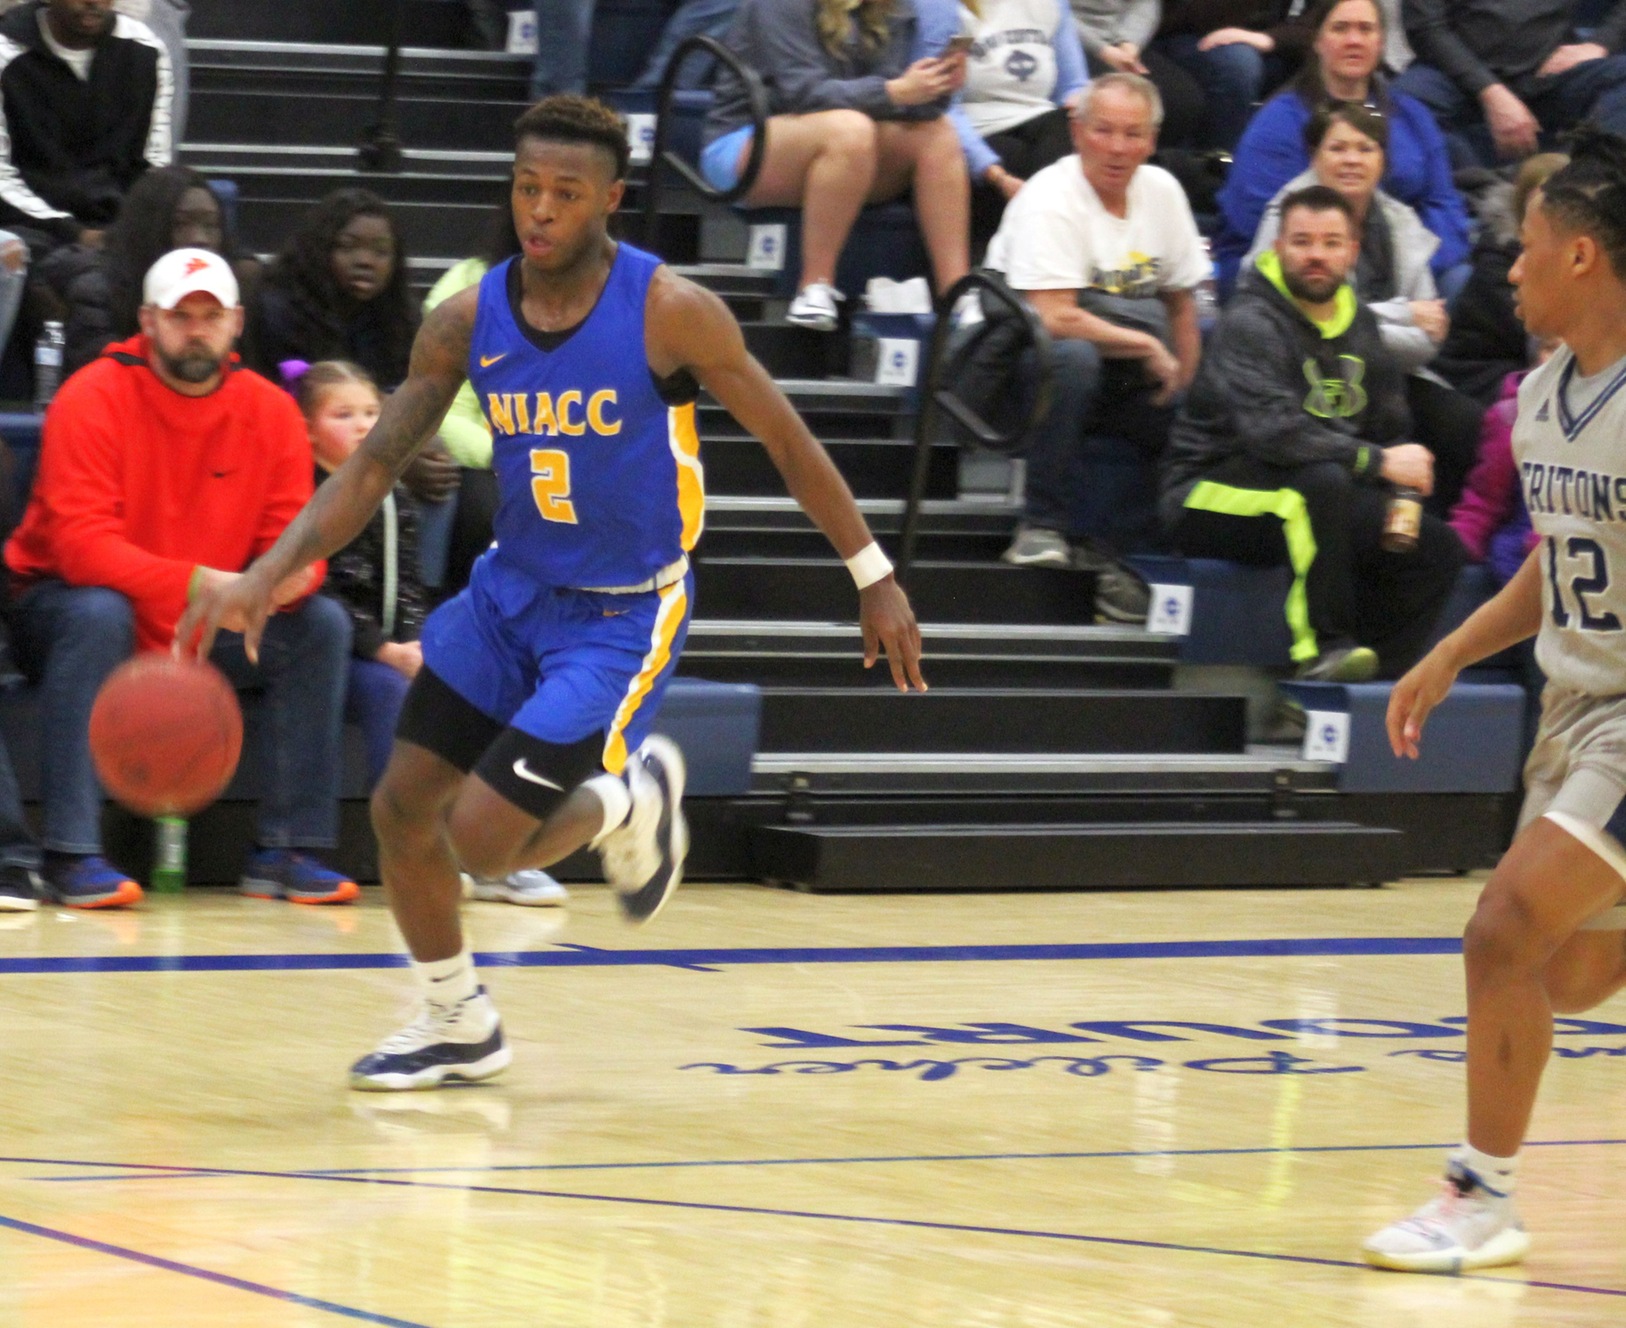 NIACC's Deundra Roberson drives to the basket in Saturday's game at Iowa Central.